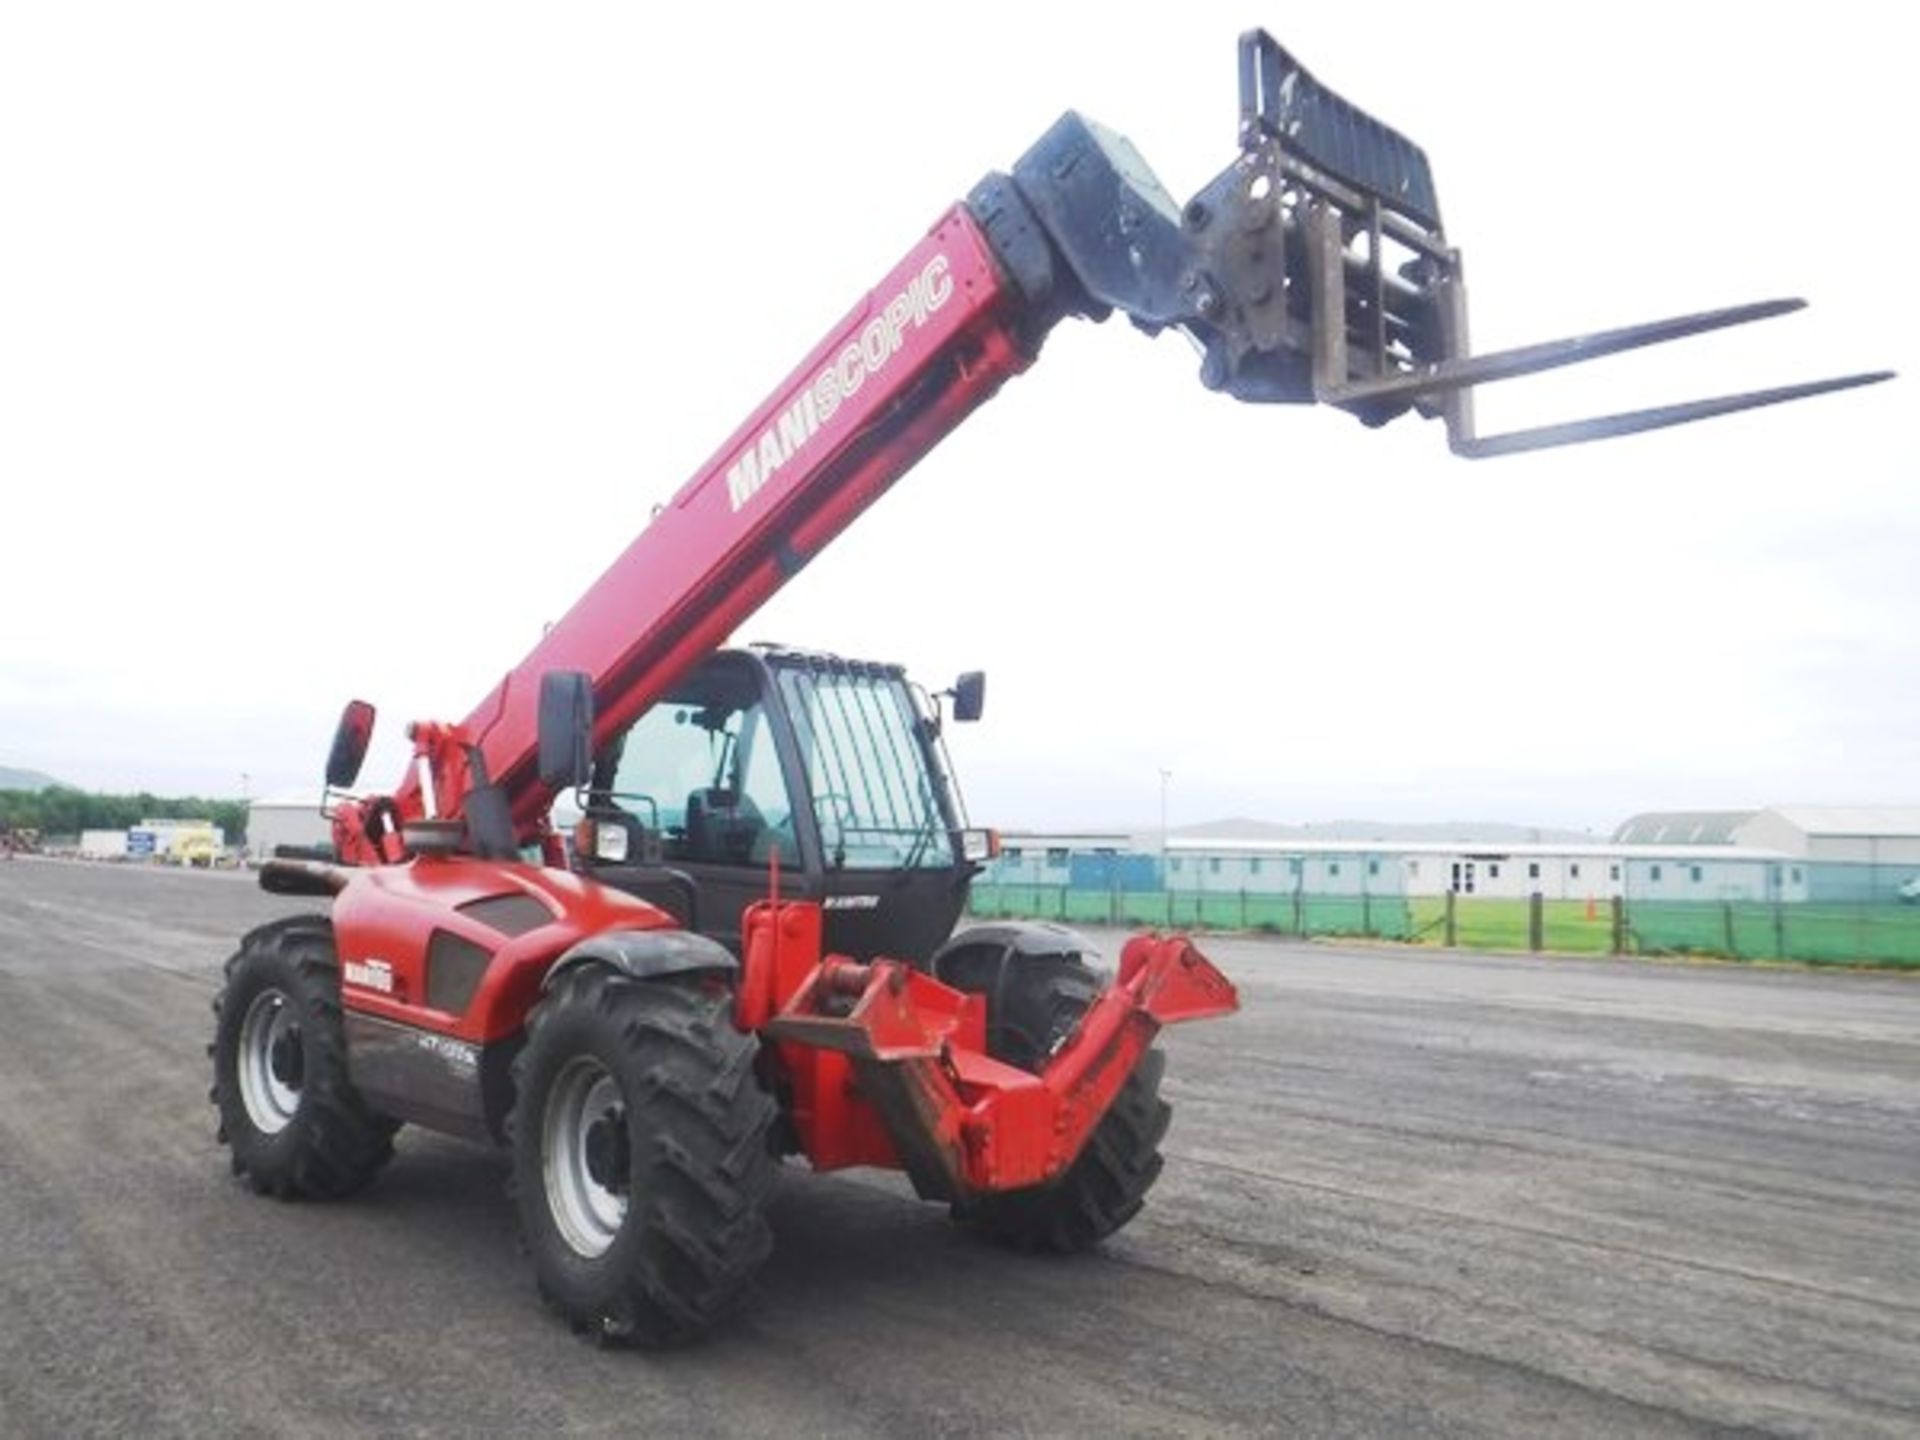 2006 MANITOU 14/35 TELEHANDLER c/w bucket & forks s/n 1230044 Reg no SP06 AXX 2646hrs (not verified) - Image 27 of 31